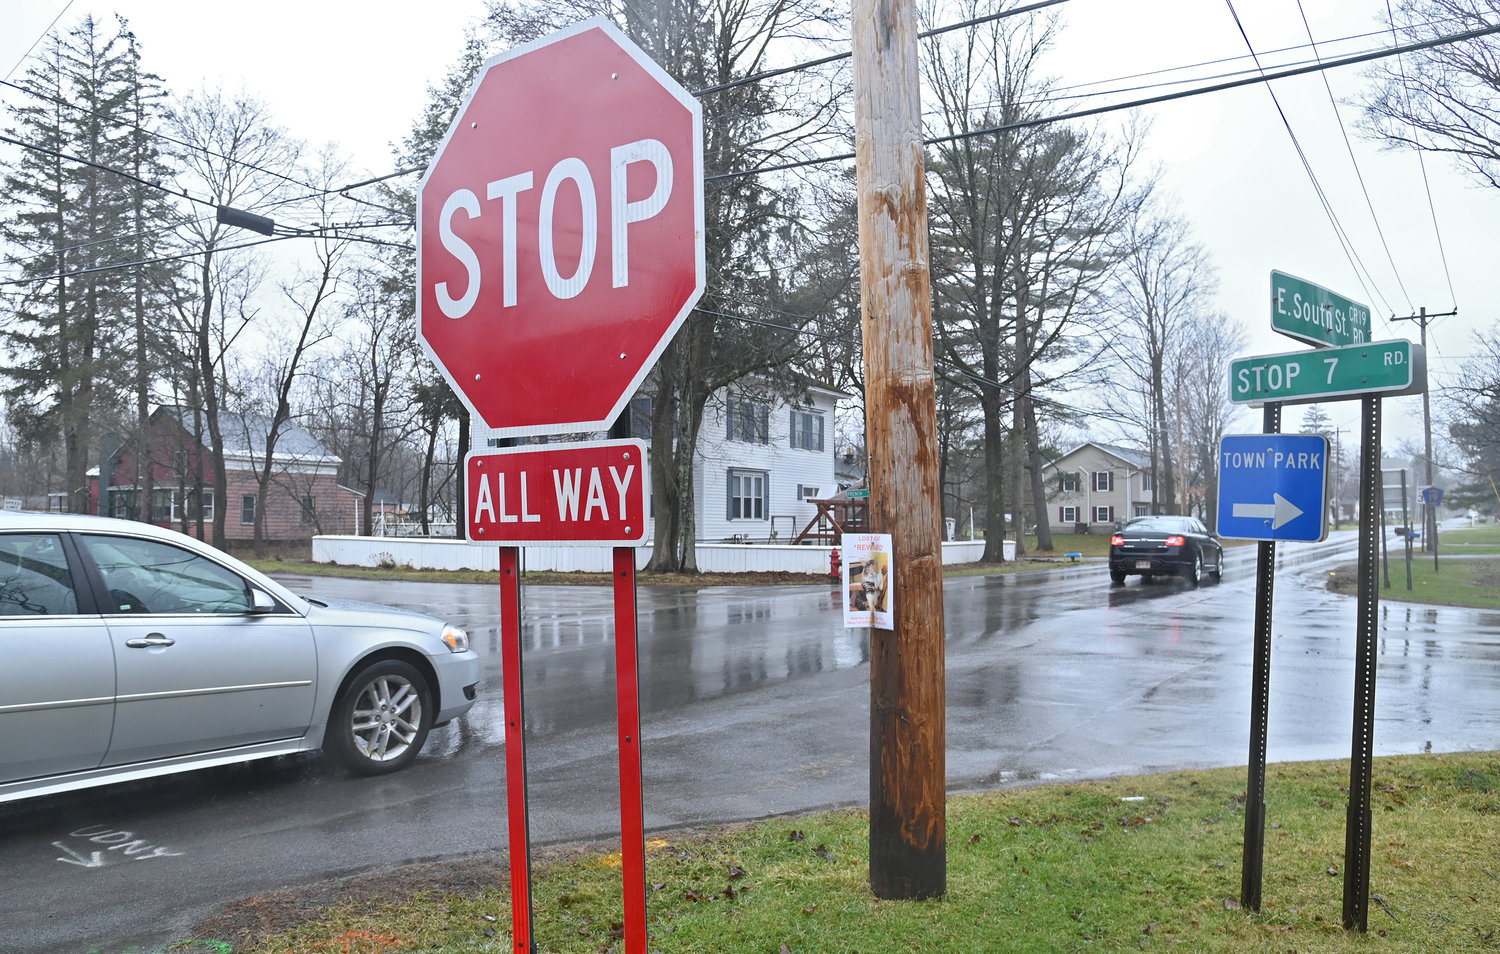 The intersection at Stop 7 Road, French Road and East South Street in Clark Mills has become a four-way stop, according to the Clark Mills Fire Department. All oncoming vehicles must stop when entering a four-way intersection, and the vehicle that stopped first is the one to go first.